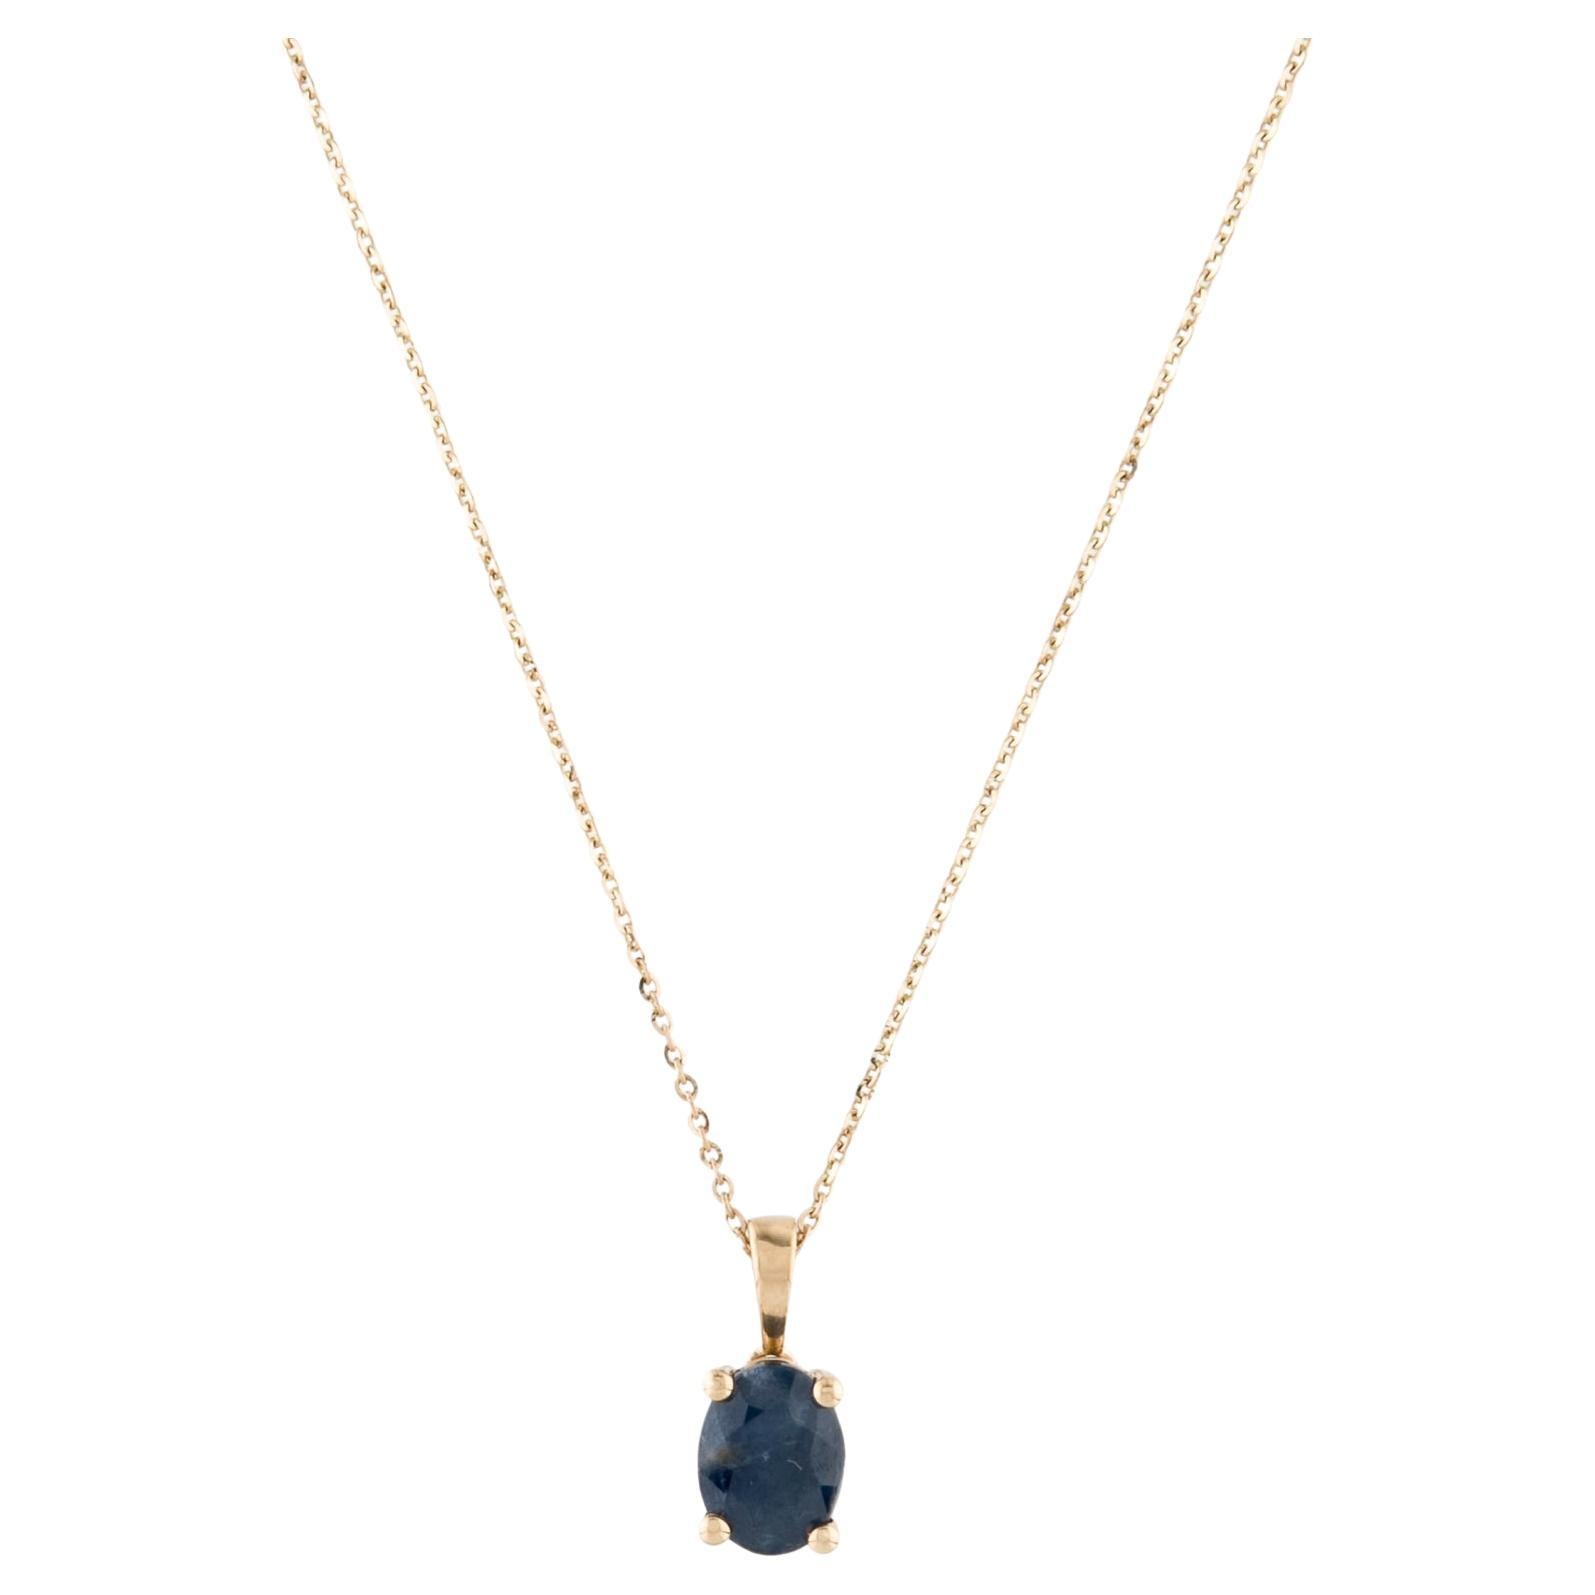 Stunning 14K Sapphire Pendant Necklace  1.50ct Sparkling Gemstone Accent Piece For Sale